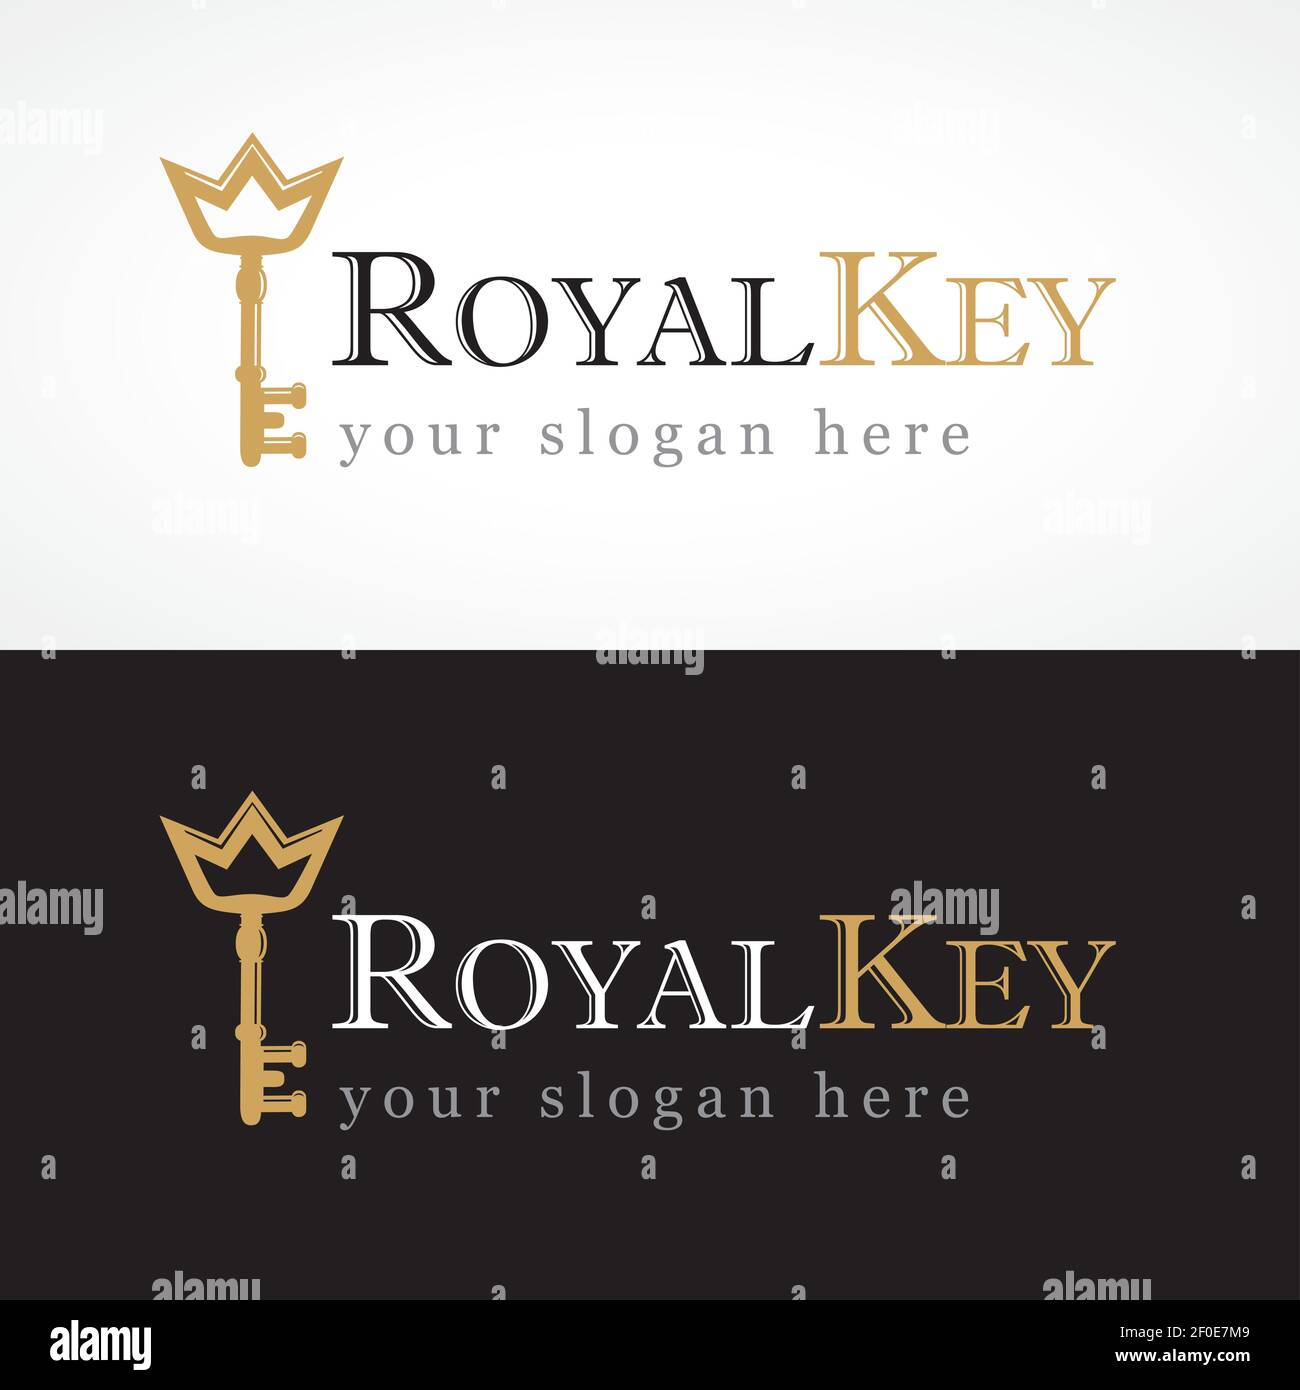 Royal key vector logo. Hotels, real estate agencies, VIP houses, building, architectural, residential companies or constructions business. Illustratio Stock Vector